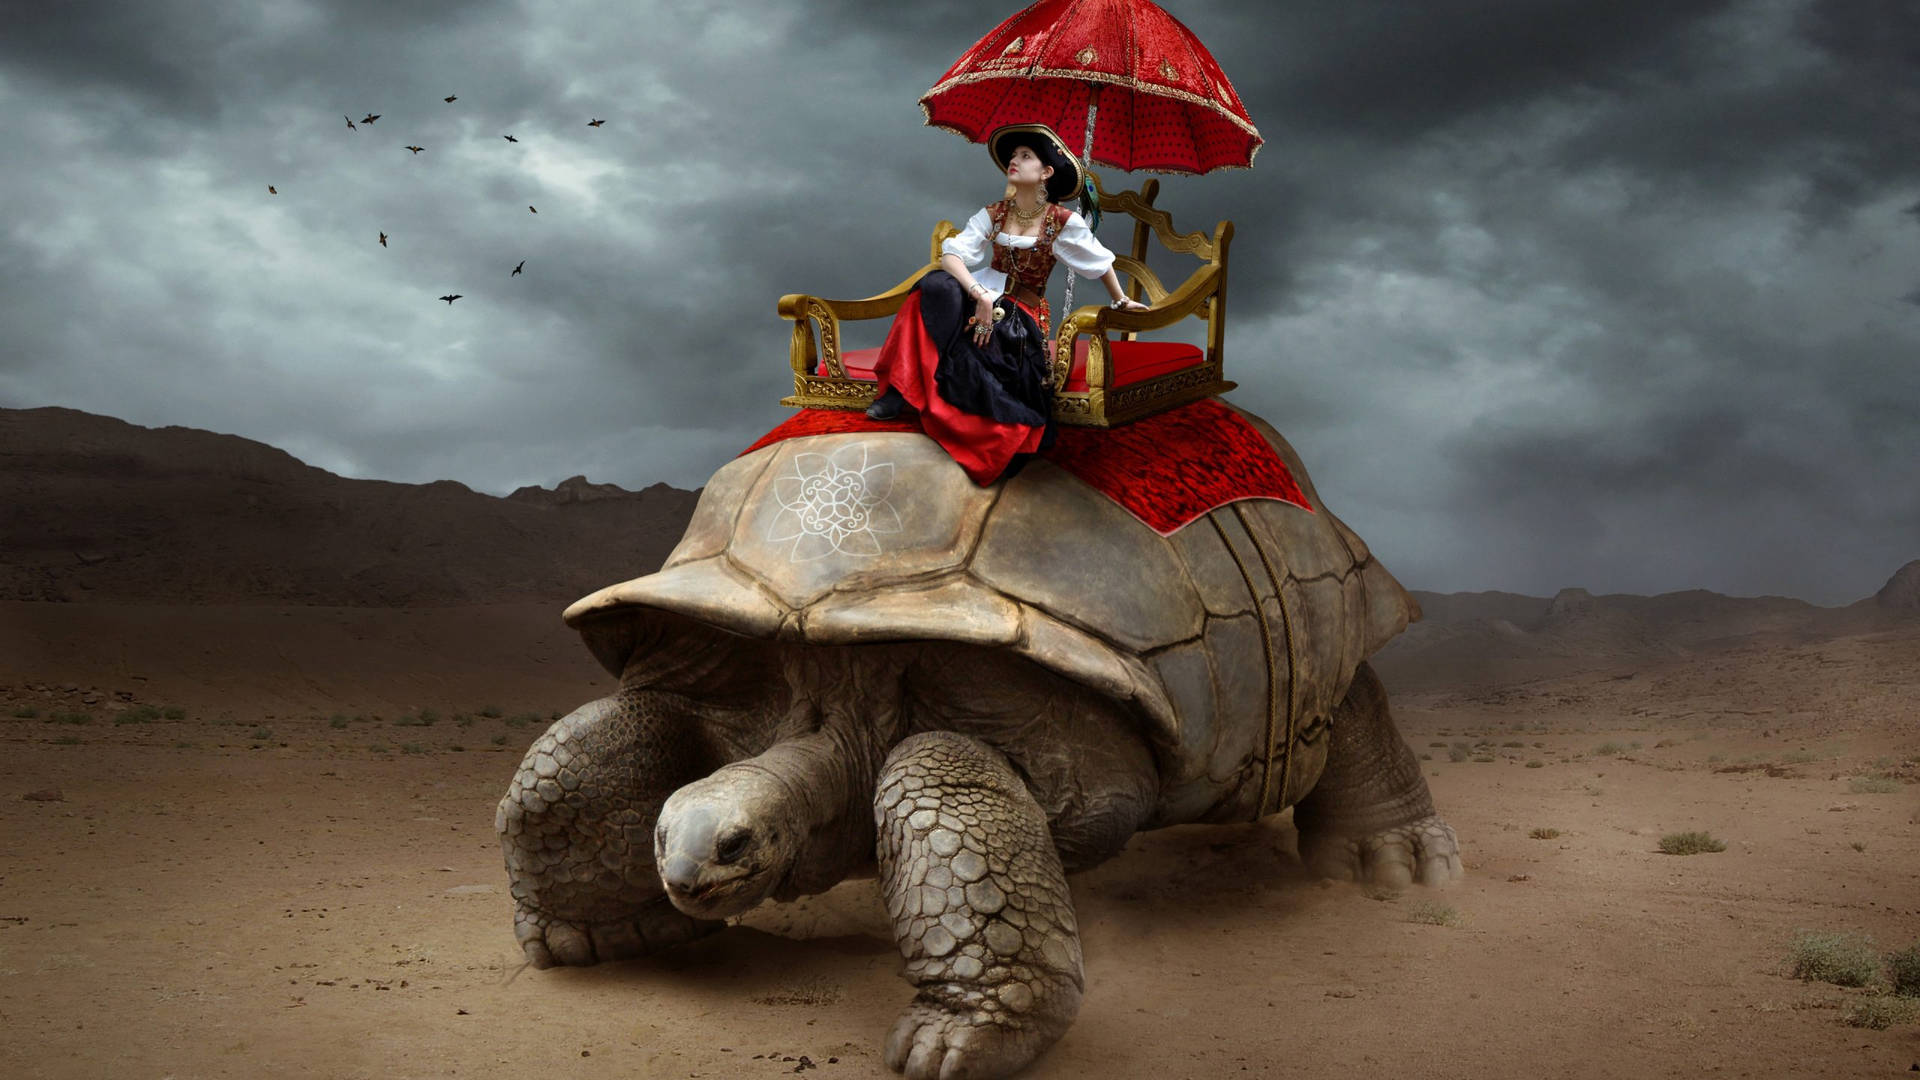 Fantasy Woman On Top Of A Tortoise Wallpaper